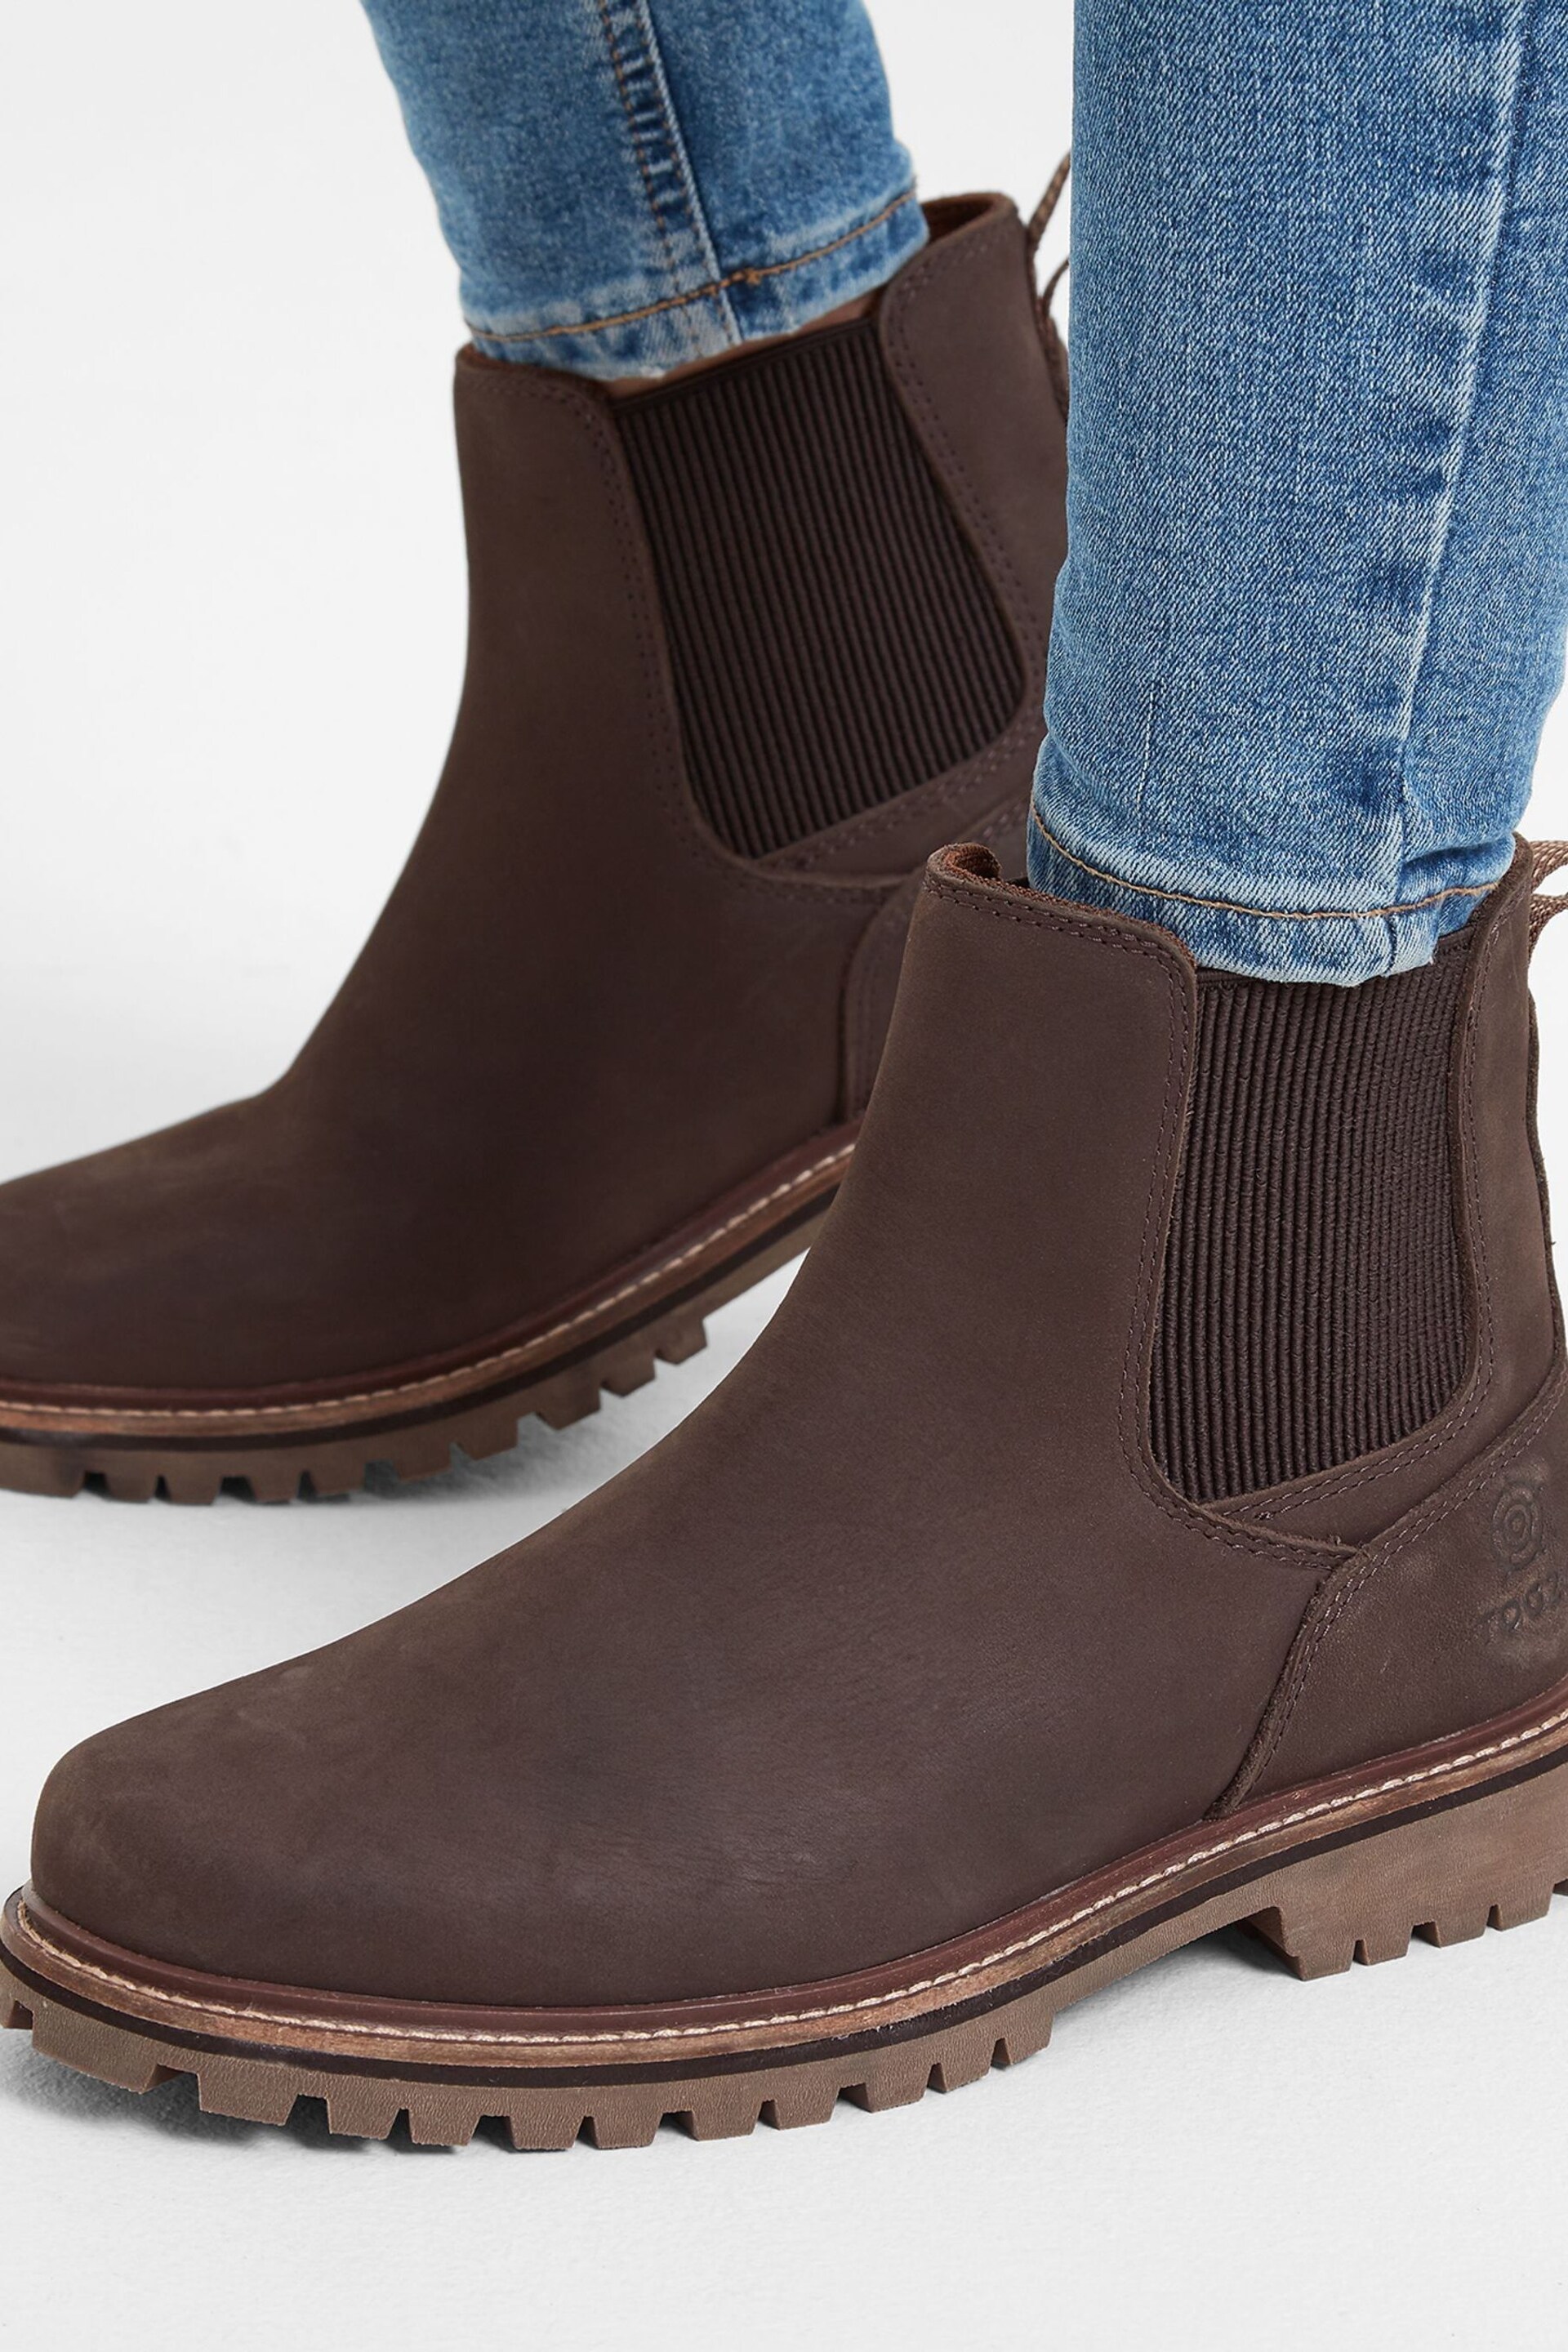 Tog 24 Brown Canyon Chelsea Boots - Image 2 of 2